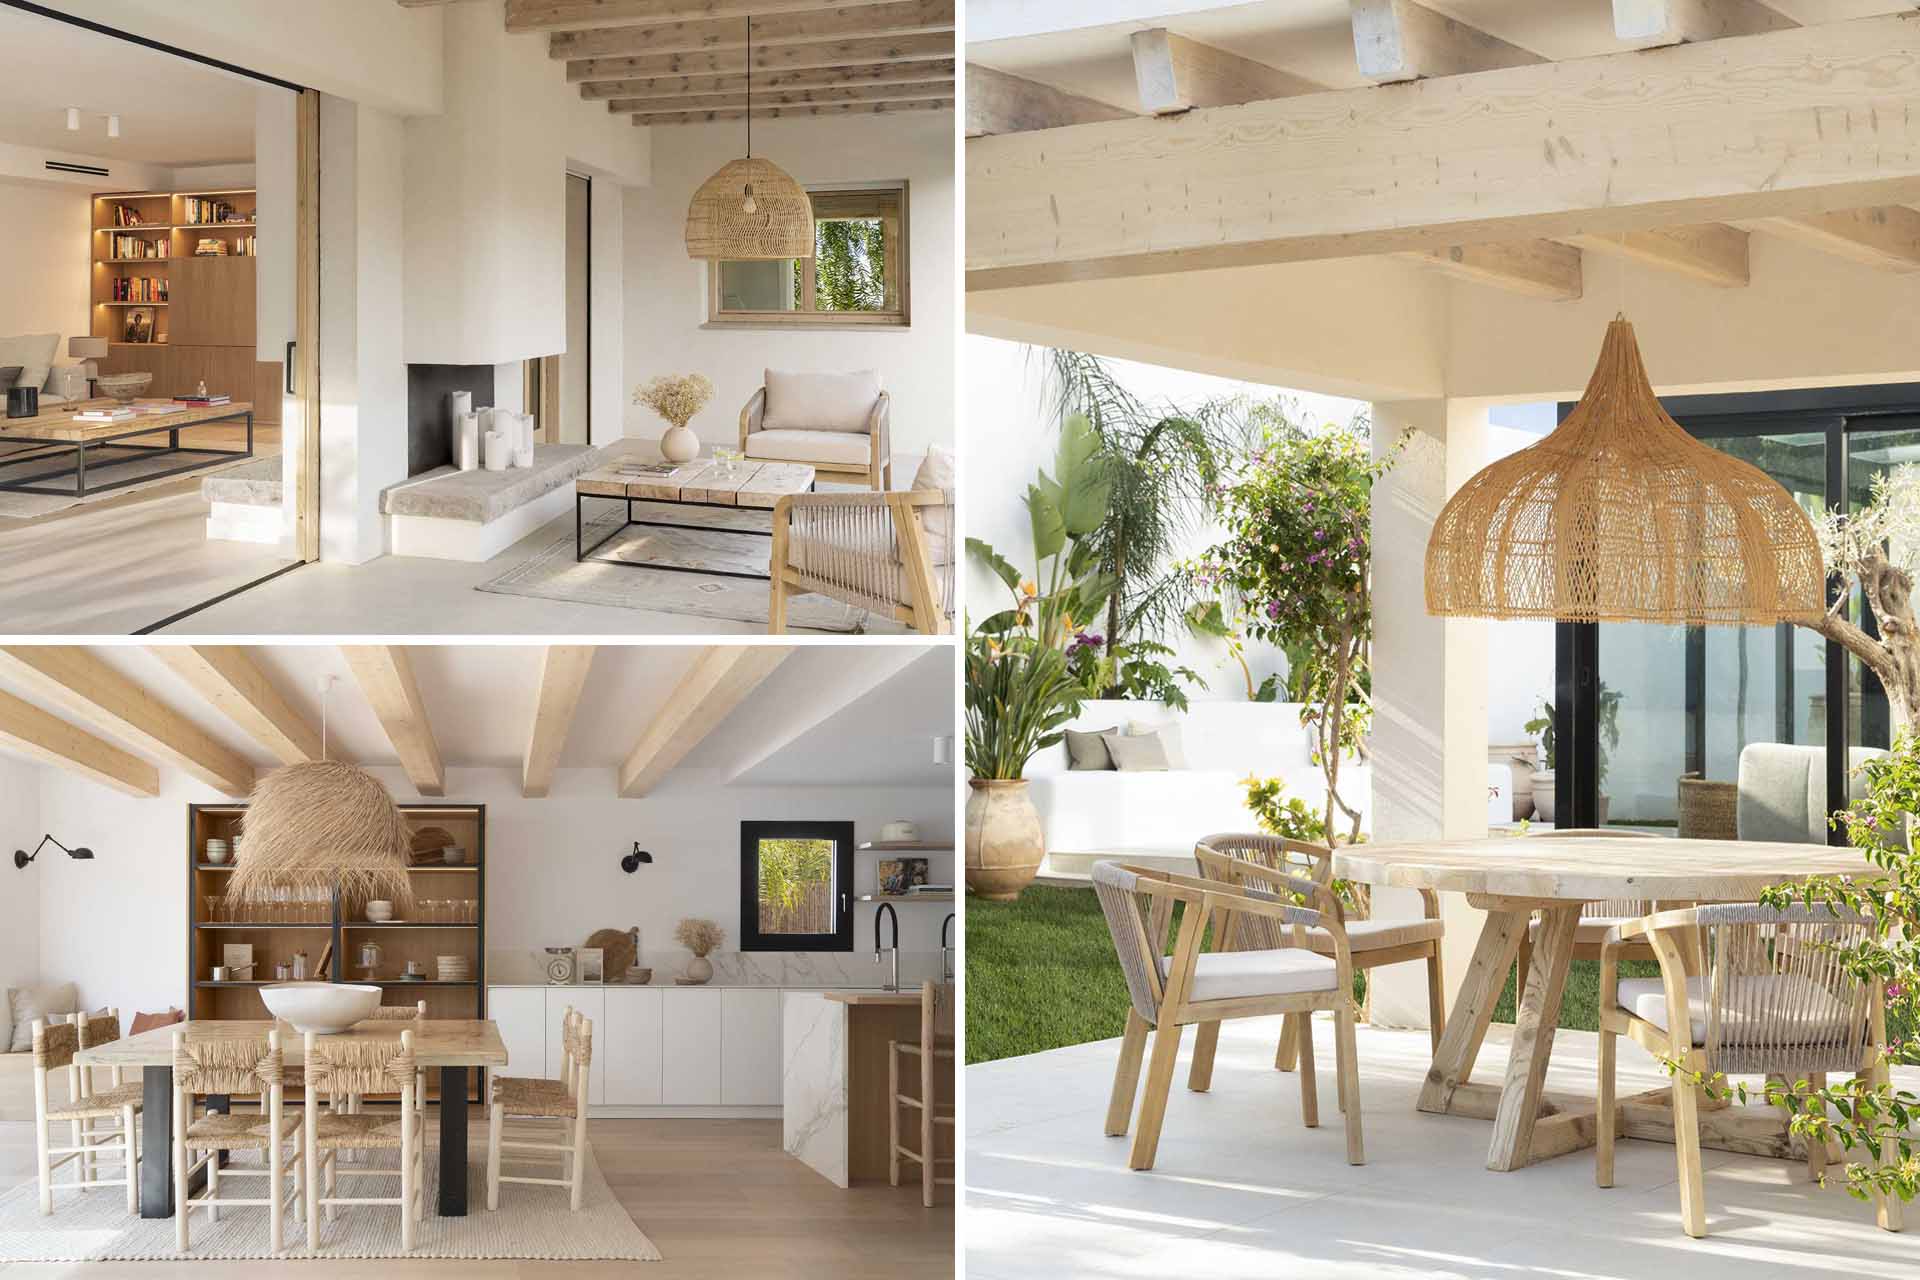 A calm and neutral color palette for a home in Spain.